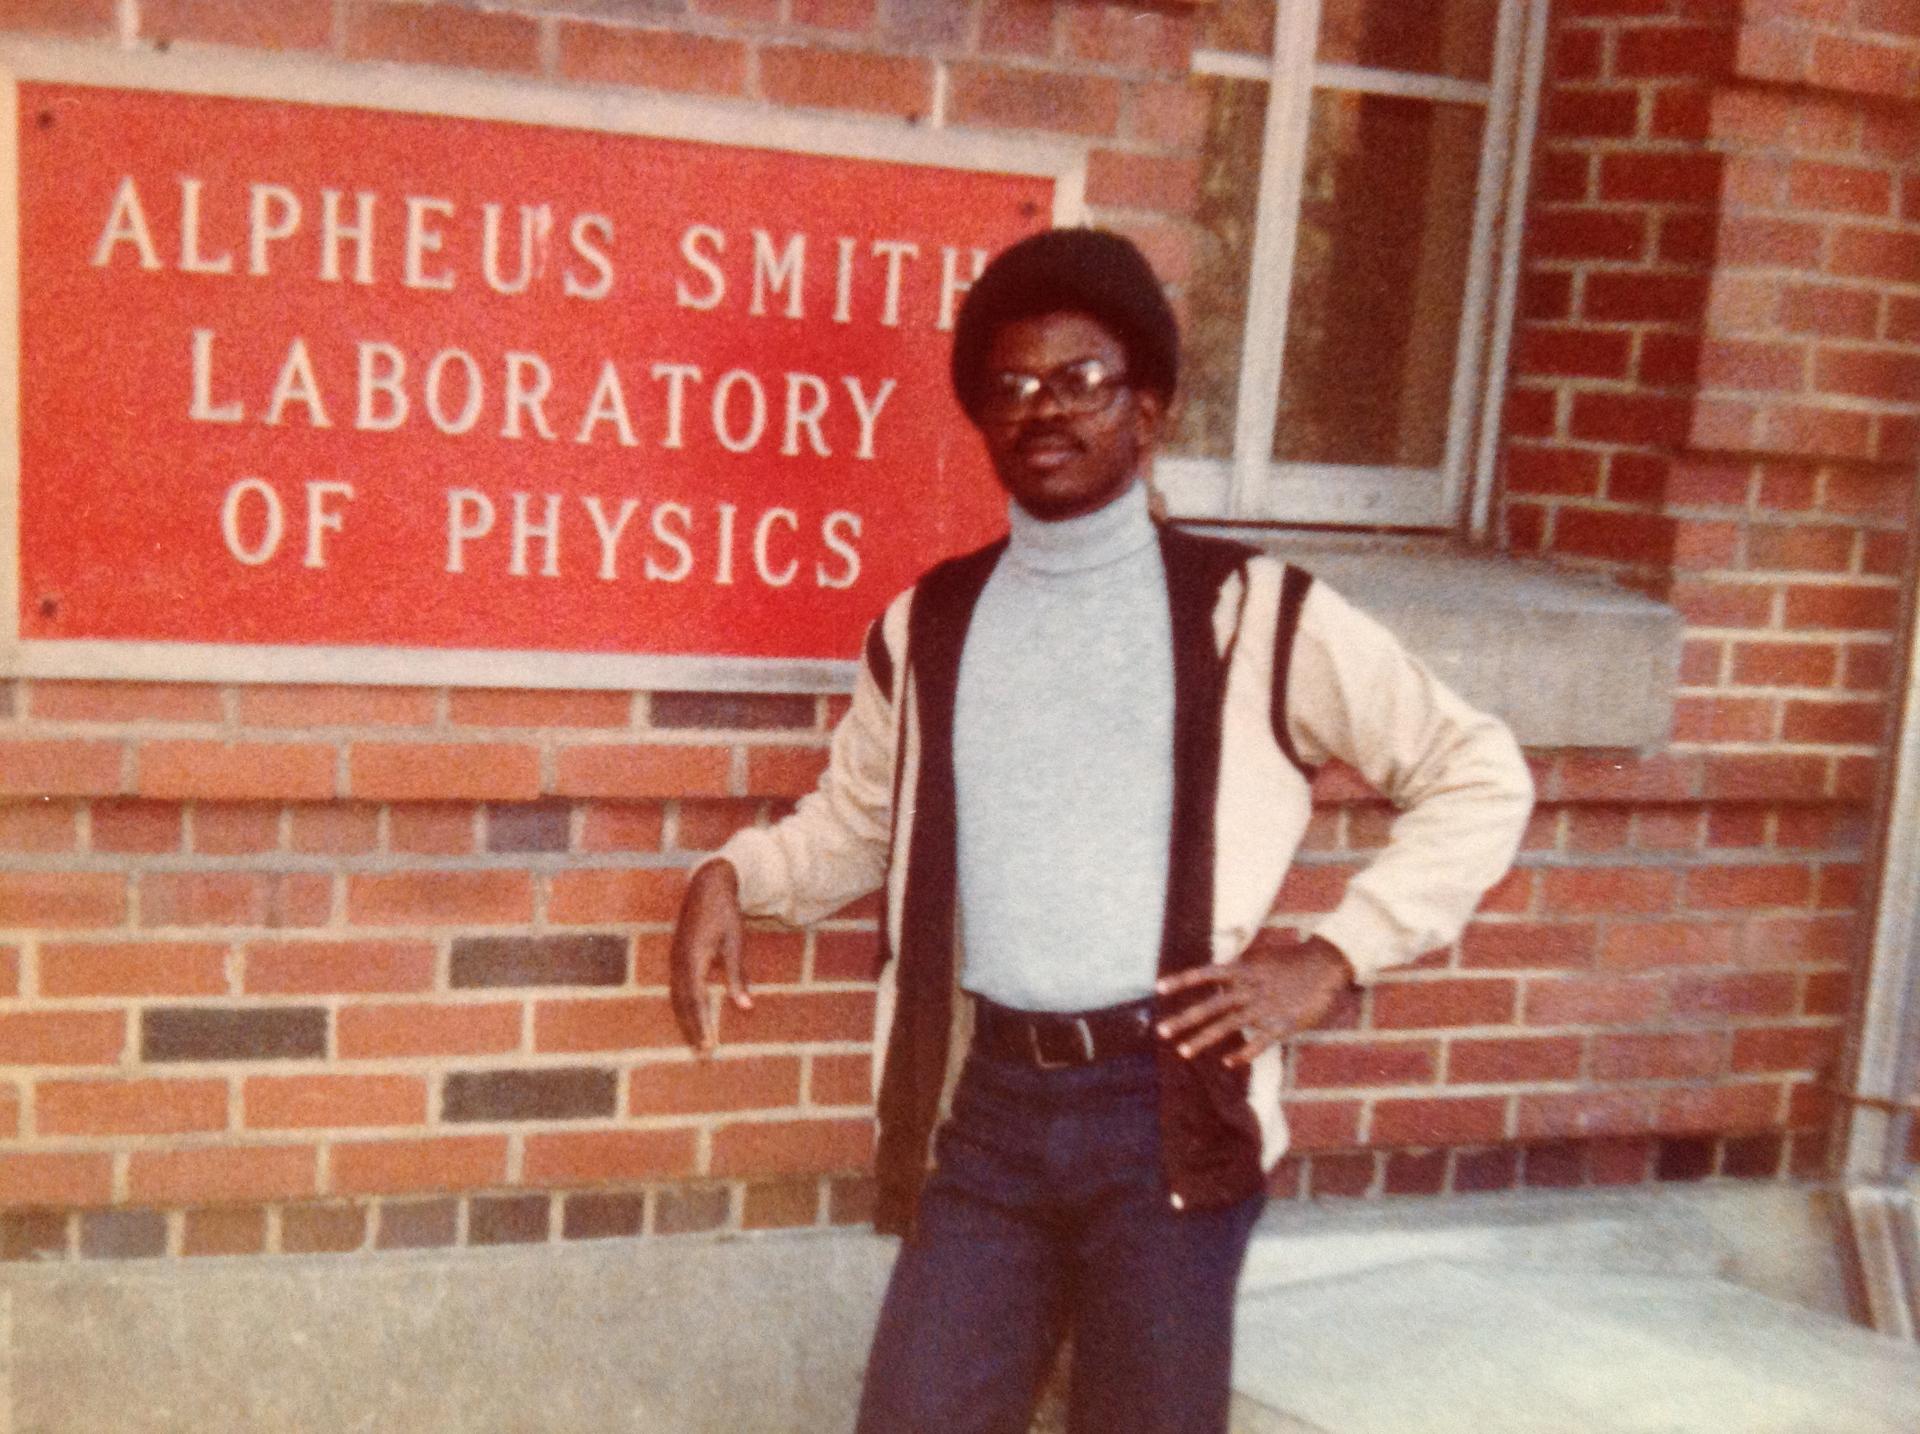 Abu Eghan at Ohio State University, shortly after arriving to the United States in 1979. Back then, he says, he thought he would get his degree and head back home. But as the political situation in Ghana grew worse, his friends and family warned him not t